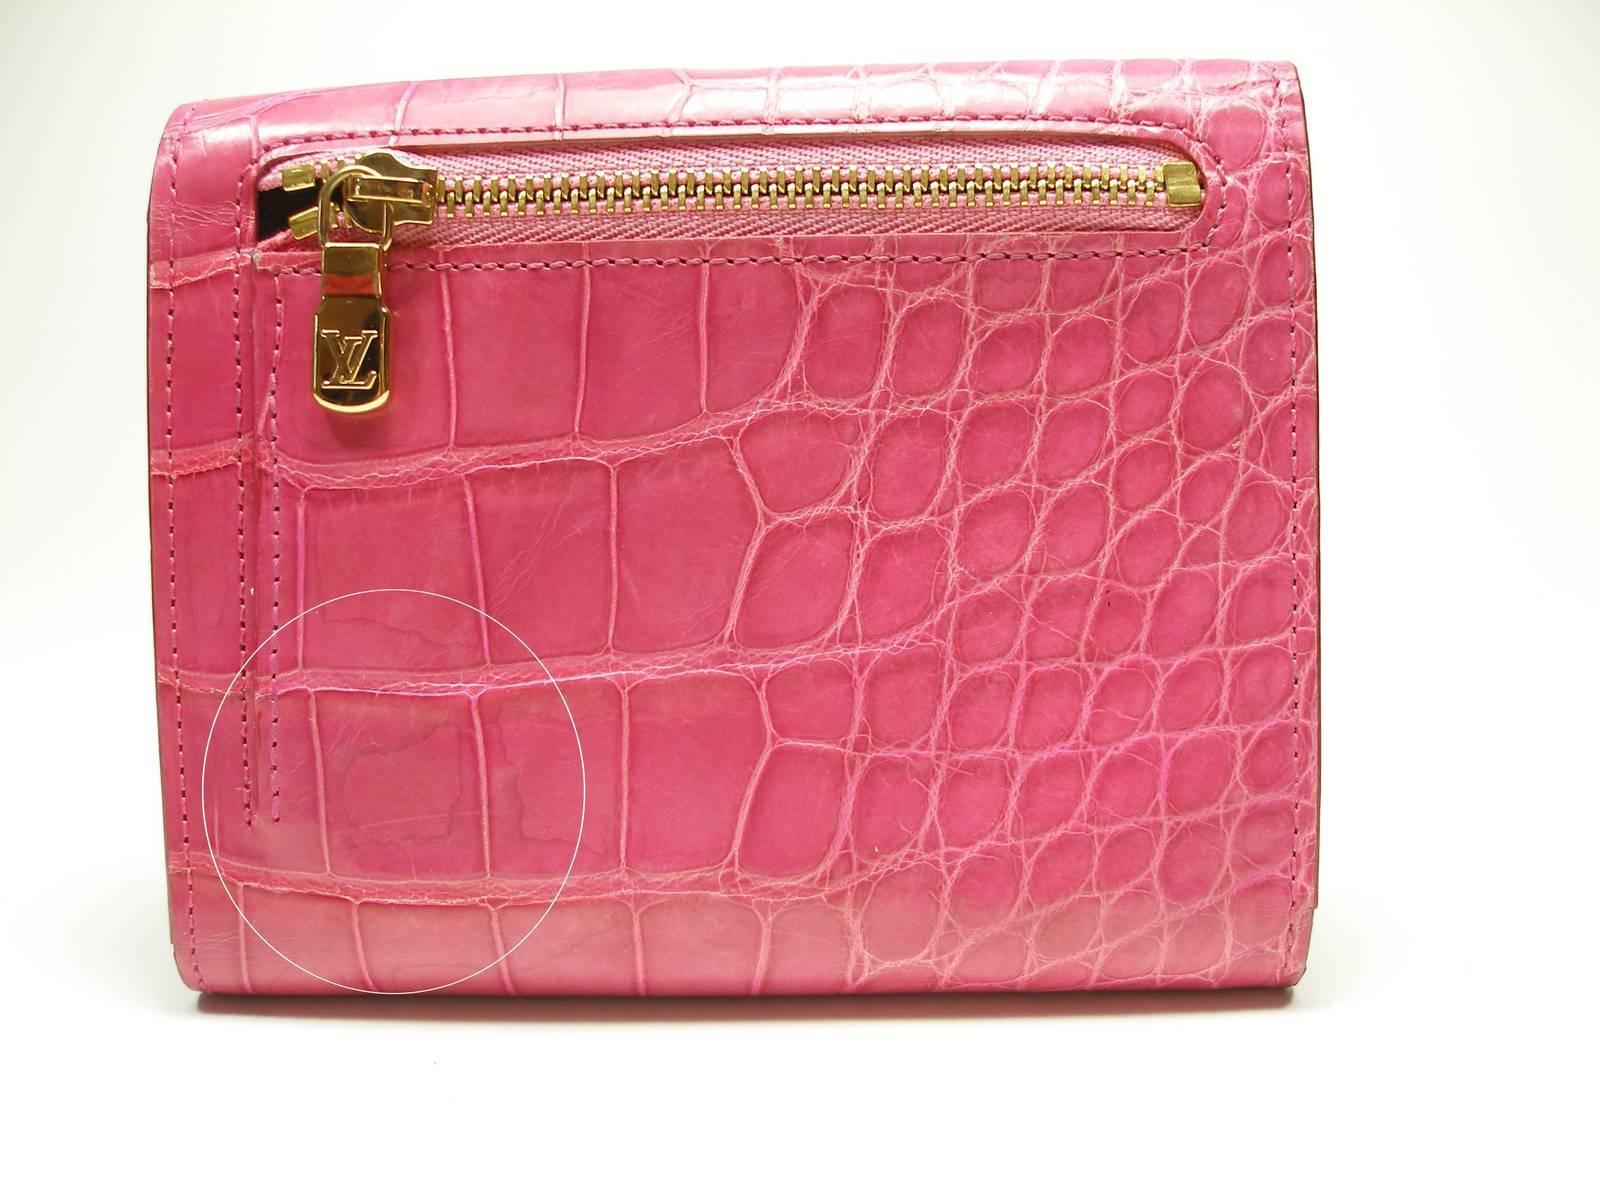  LOUIS VUITTON Alligator Koala Wallet Pink. This stylish wallet is crafted of lovely alligator skin and features a frontal flap with a brass press lock. This opens to a matte chevre goatskin leather interior with card slots, patch pockets, an ID